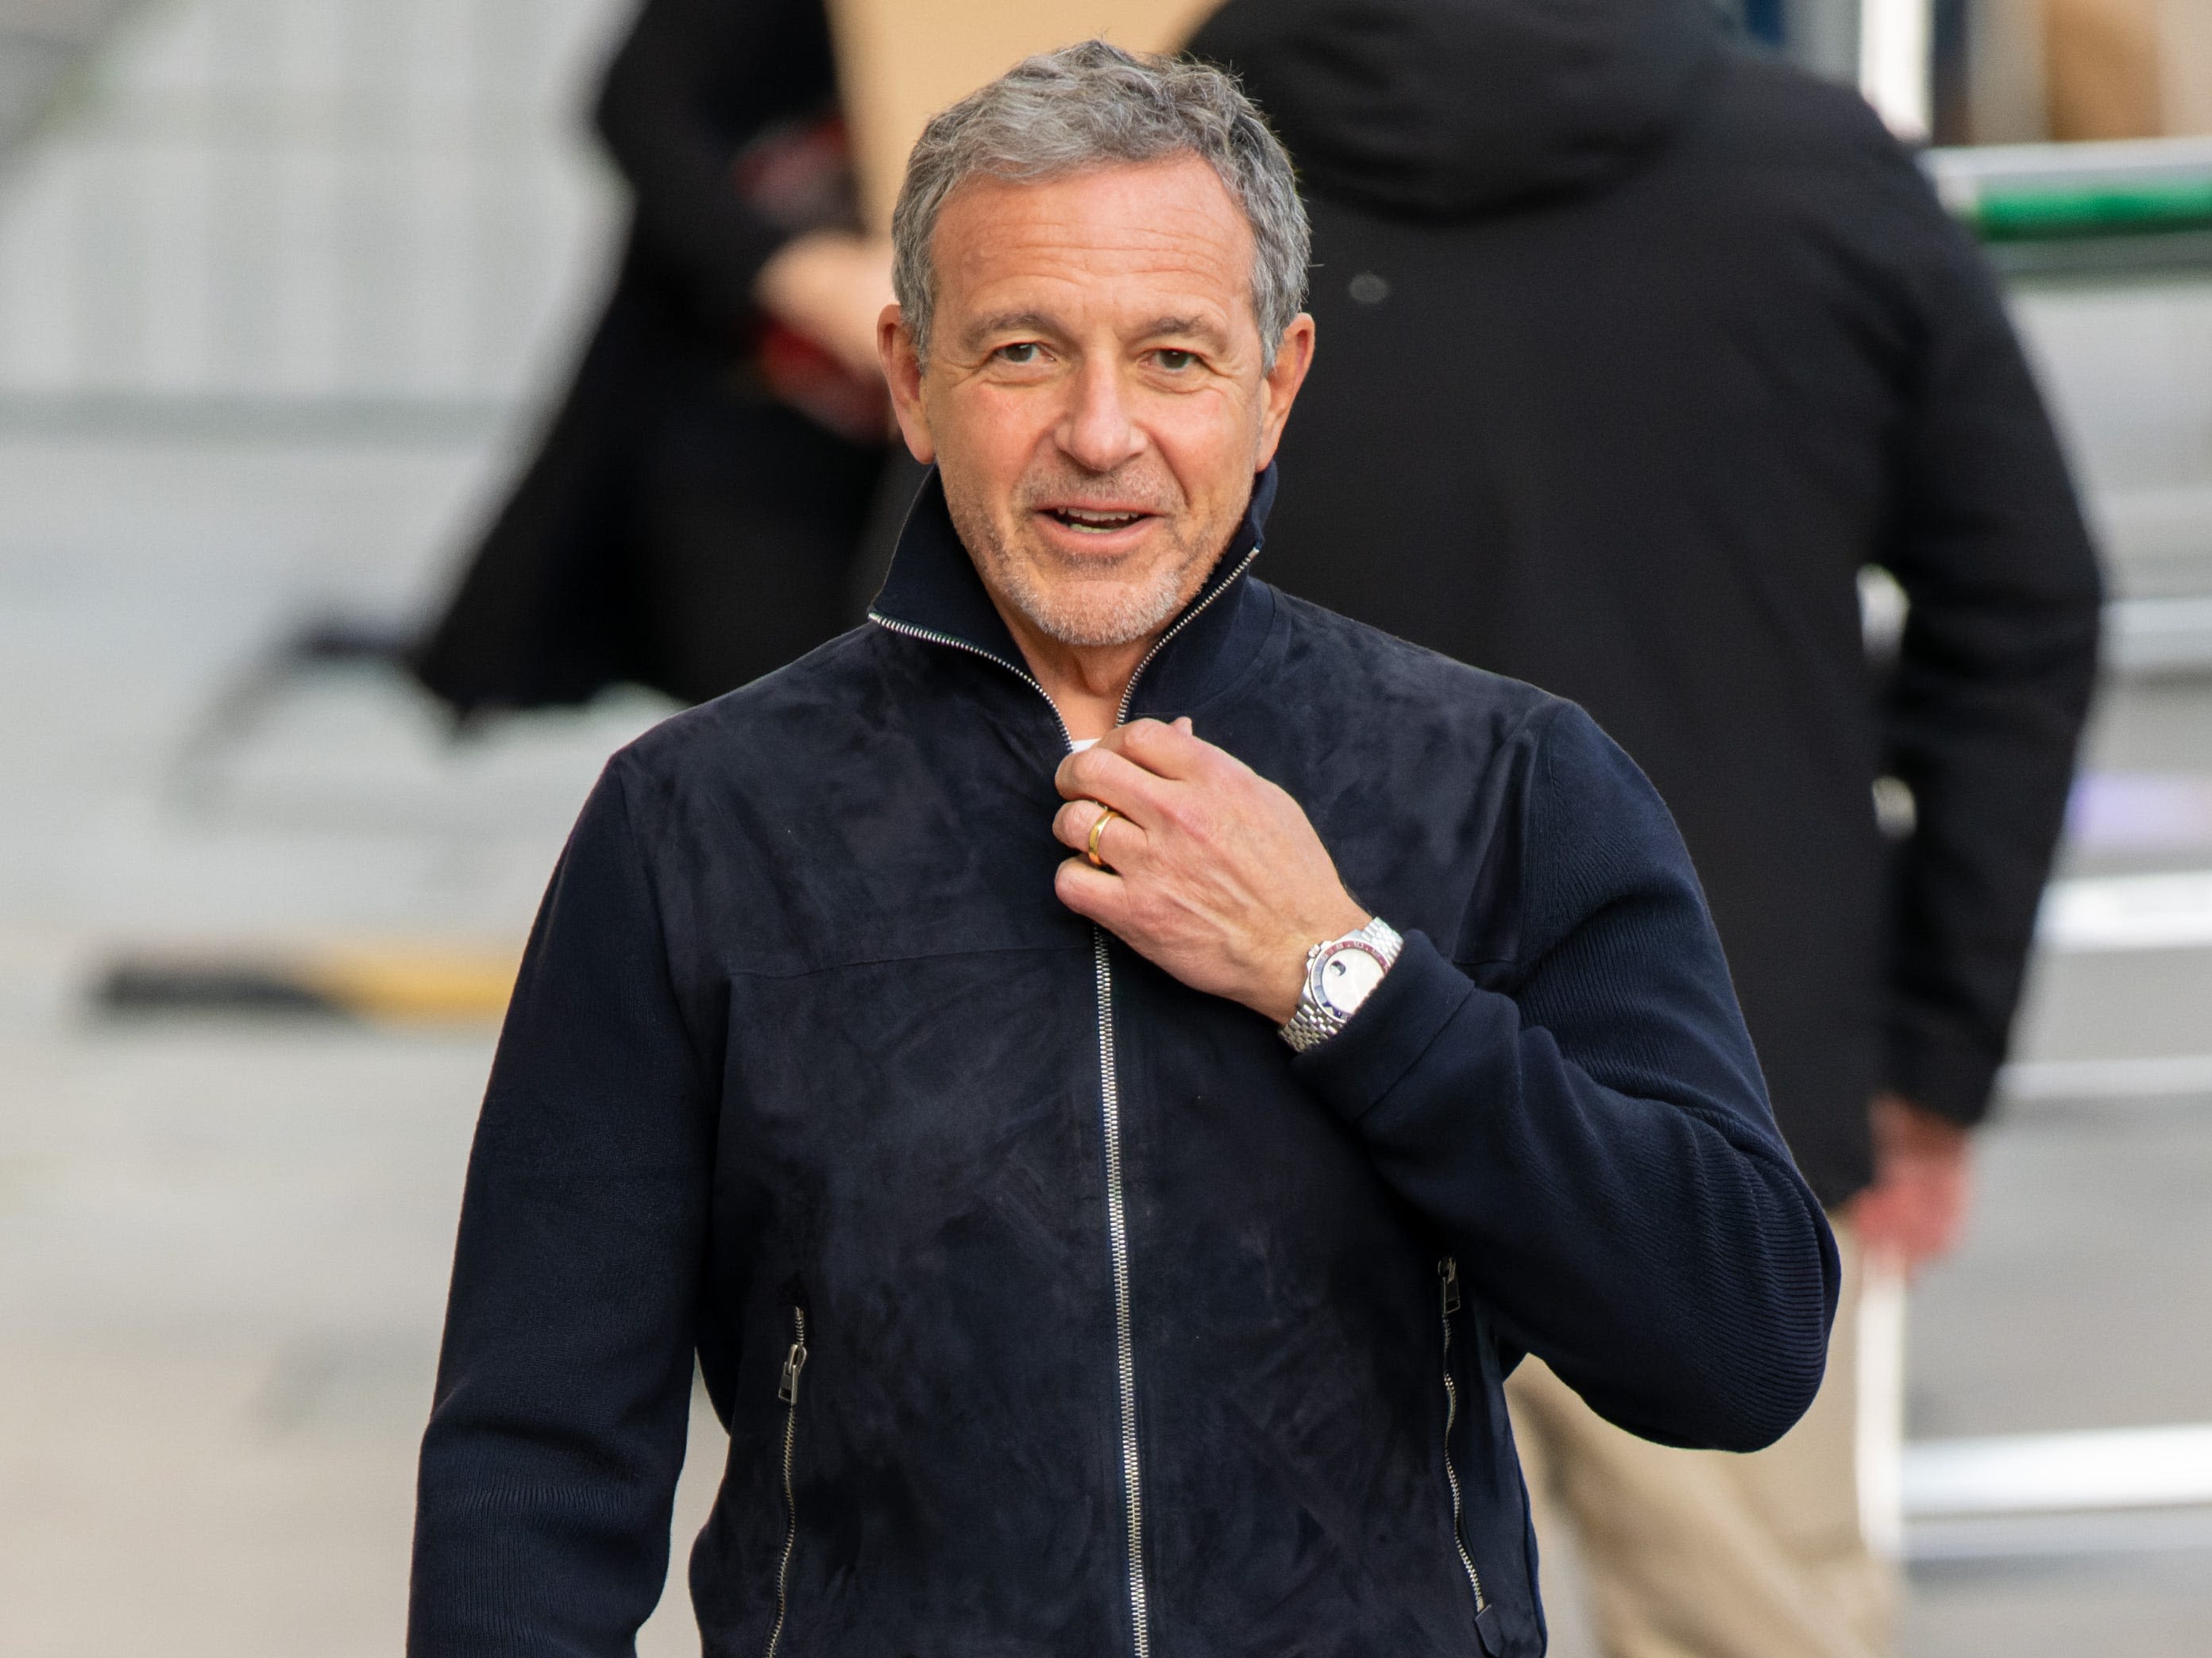 The career rise of Bob Iger — and how the Disney CEO spends his fortune